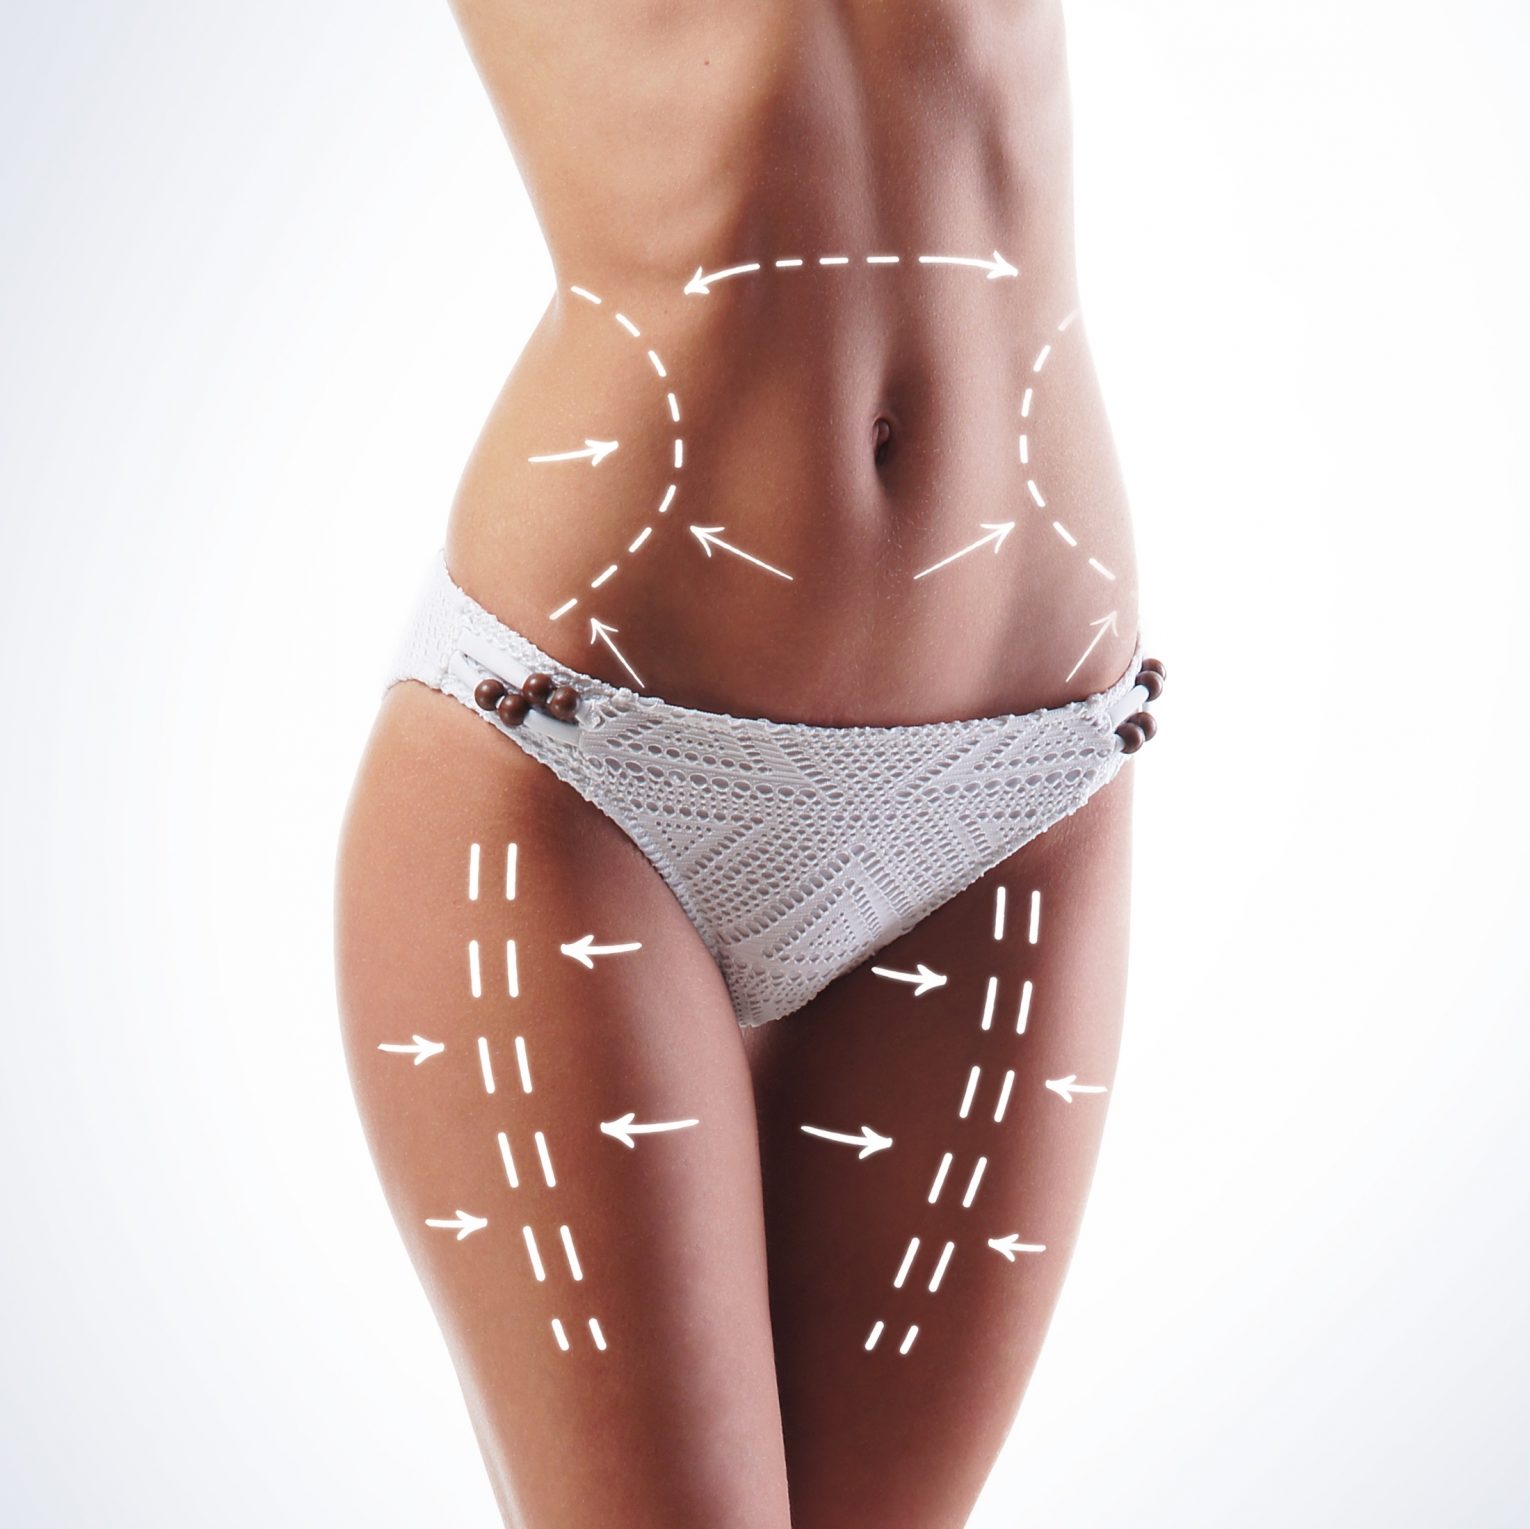 Are there Alternatives to Liposuction Surgery?